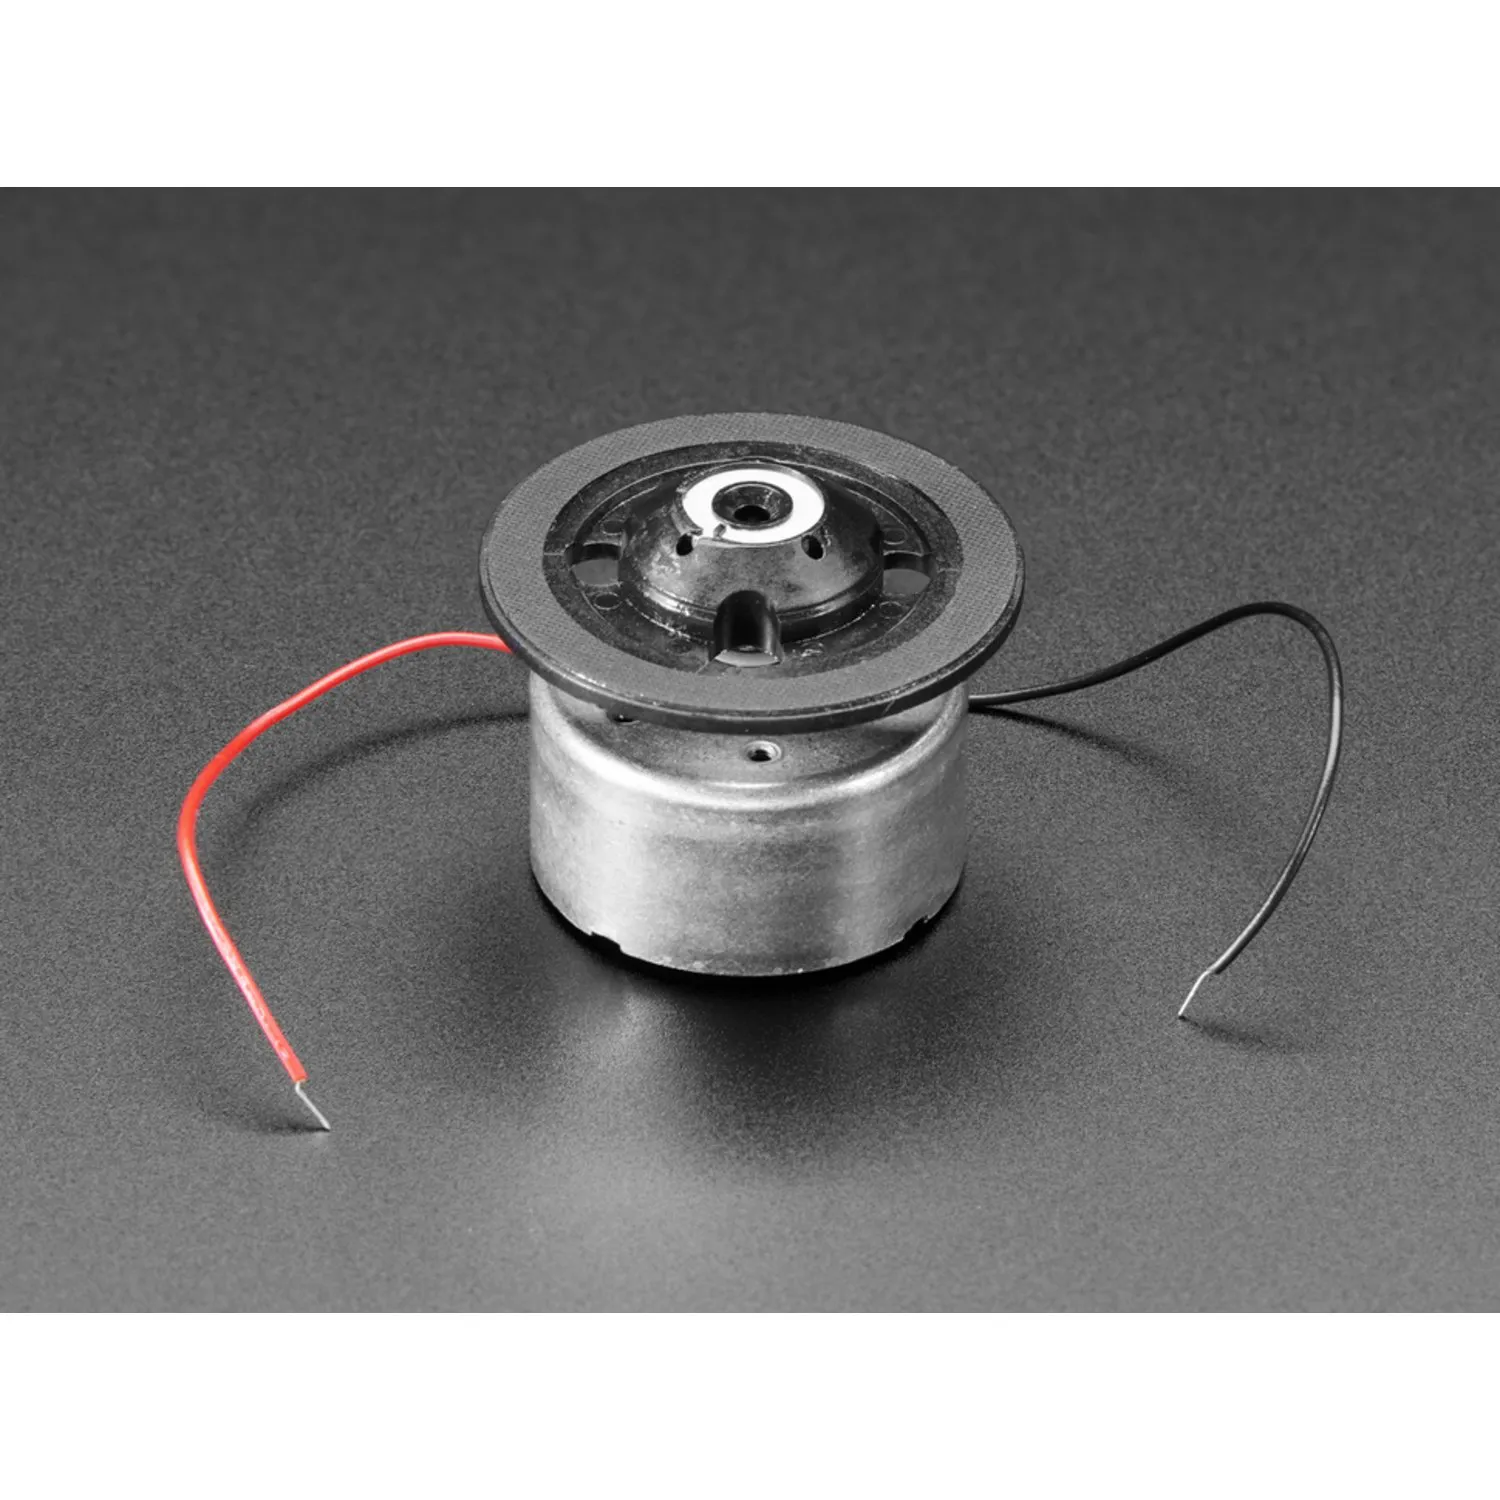 Photo of CD DVD Spindle Motor